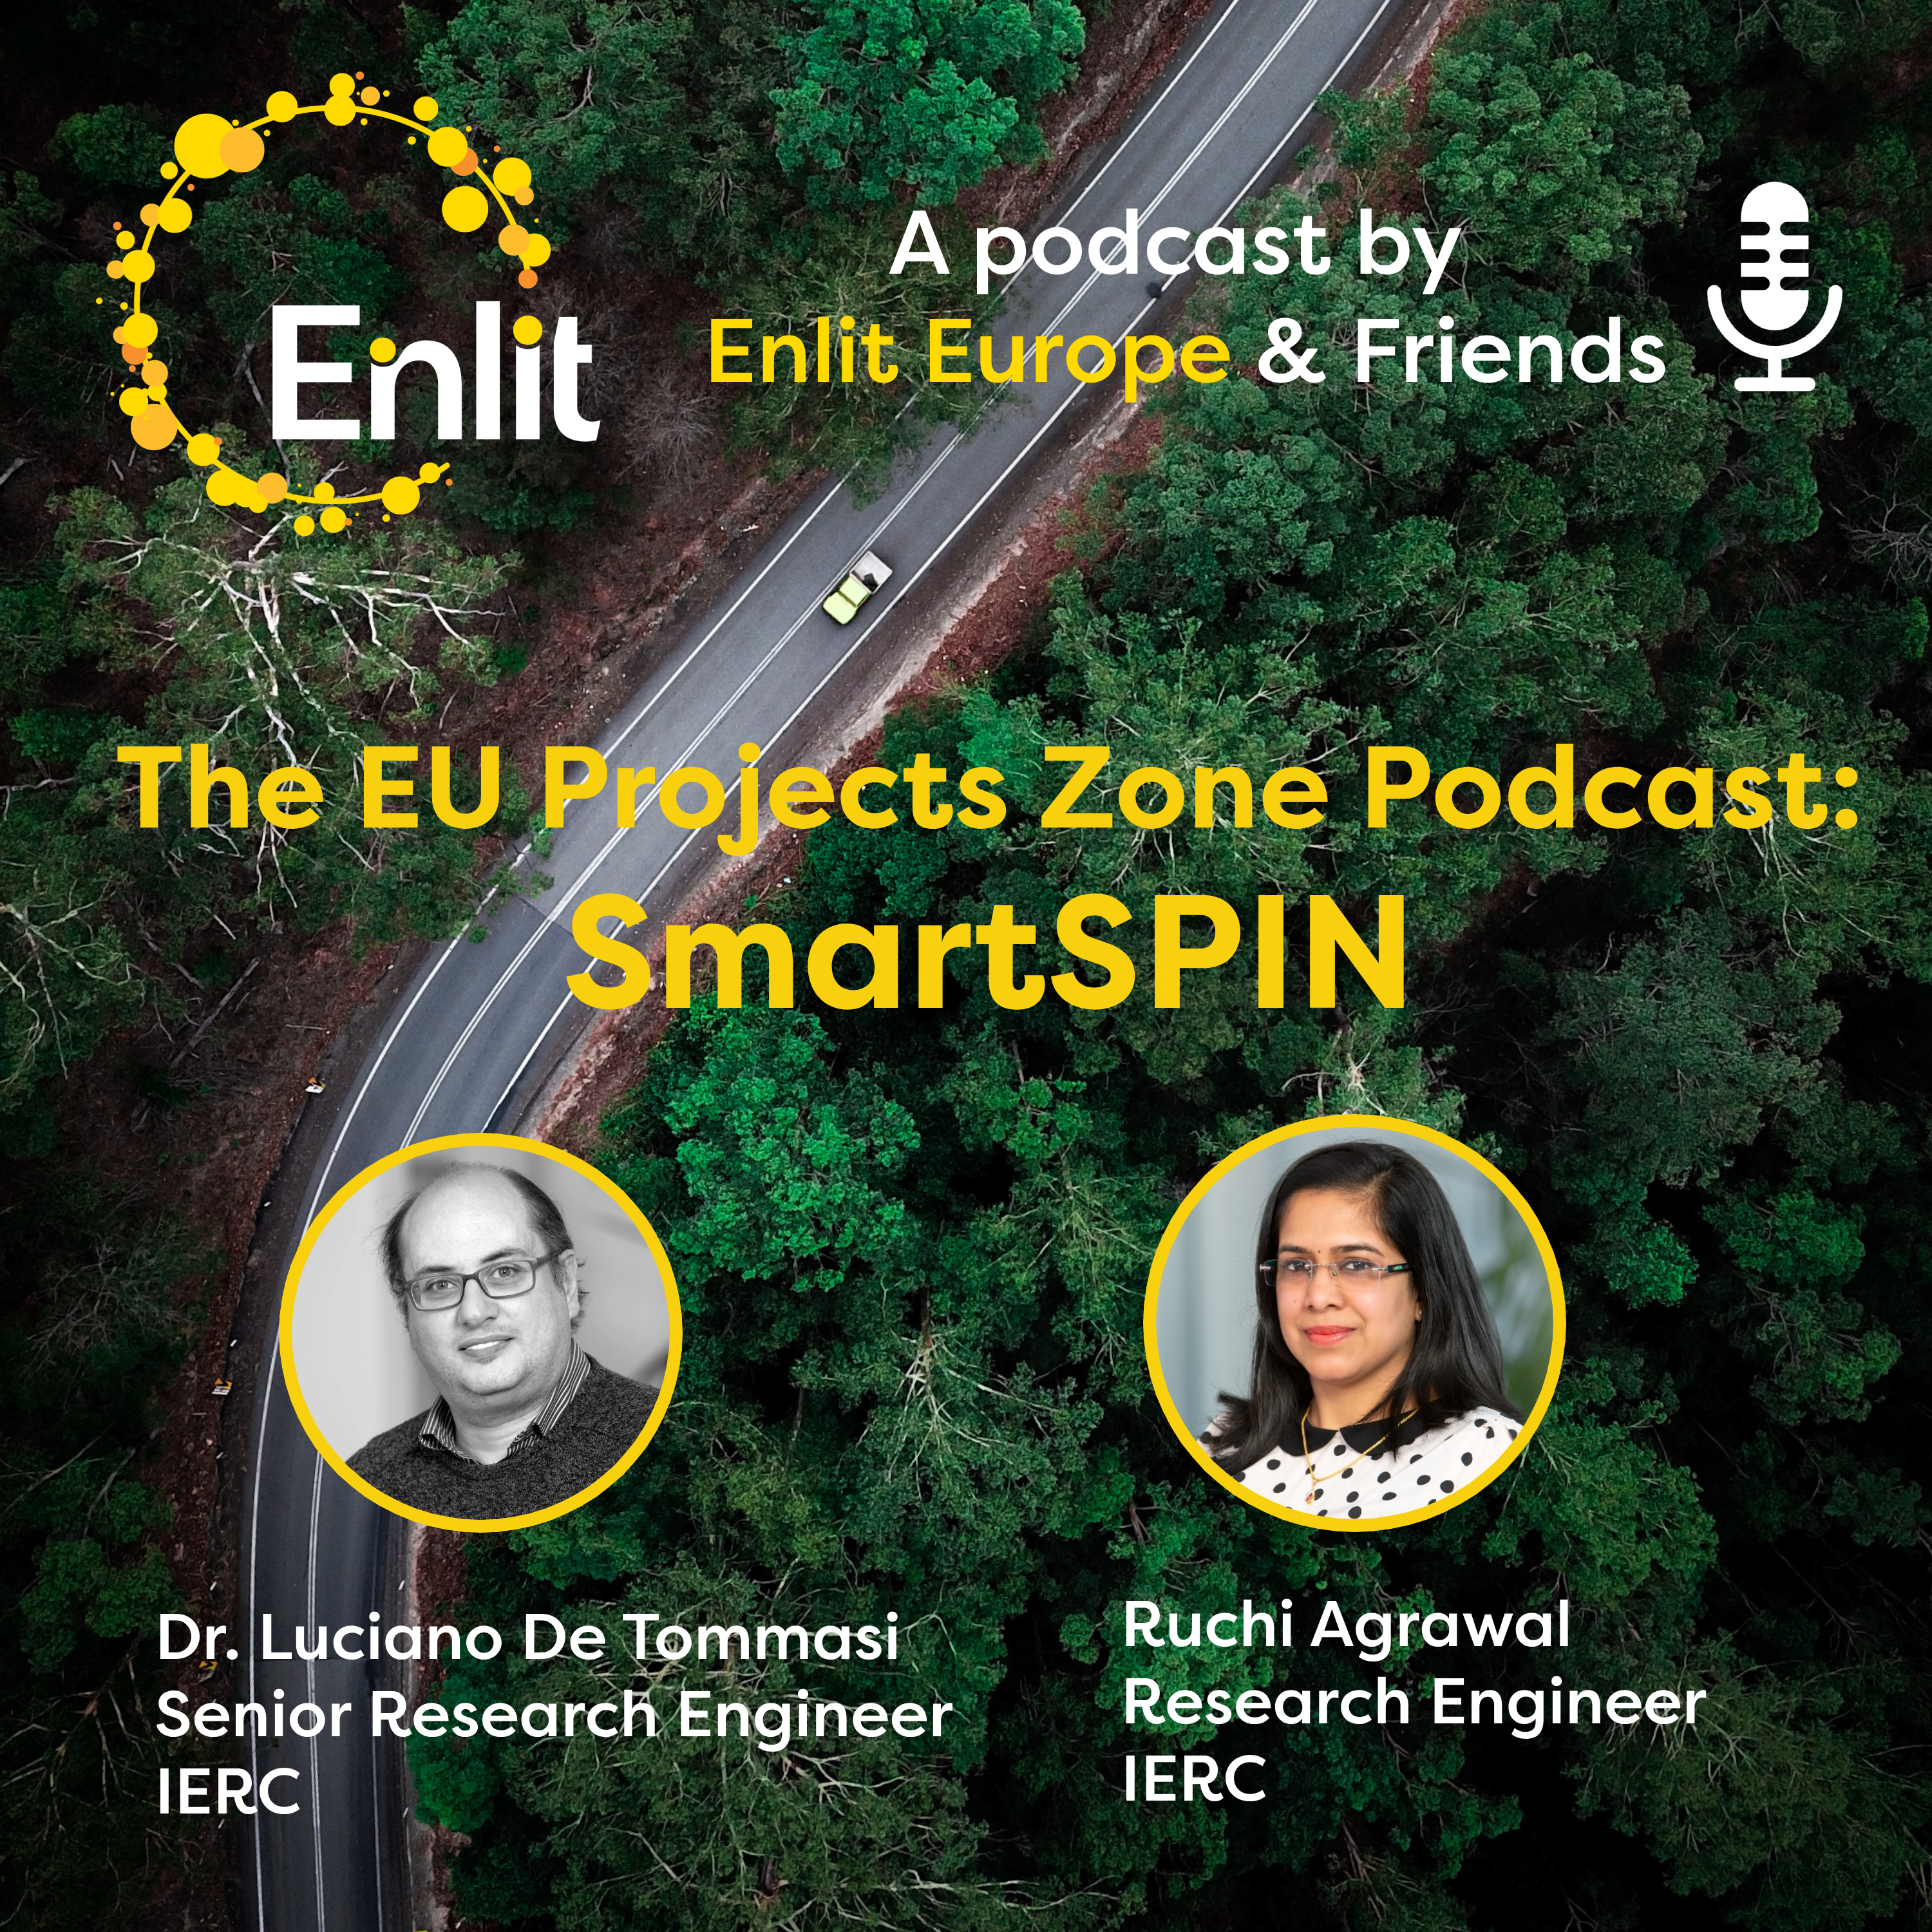 The EU Projects Zone Podcast: SmartSPIN with Luciano De Tommasi and Ruchi Agrawal